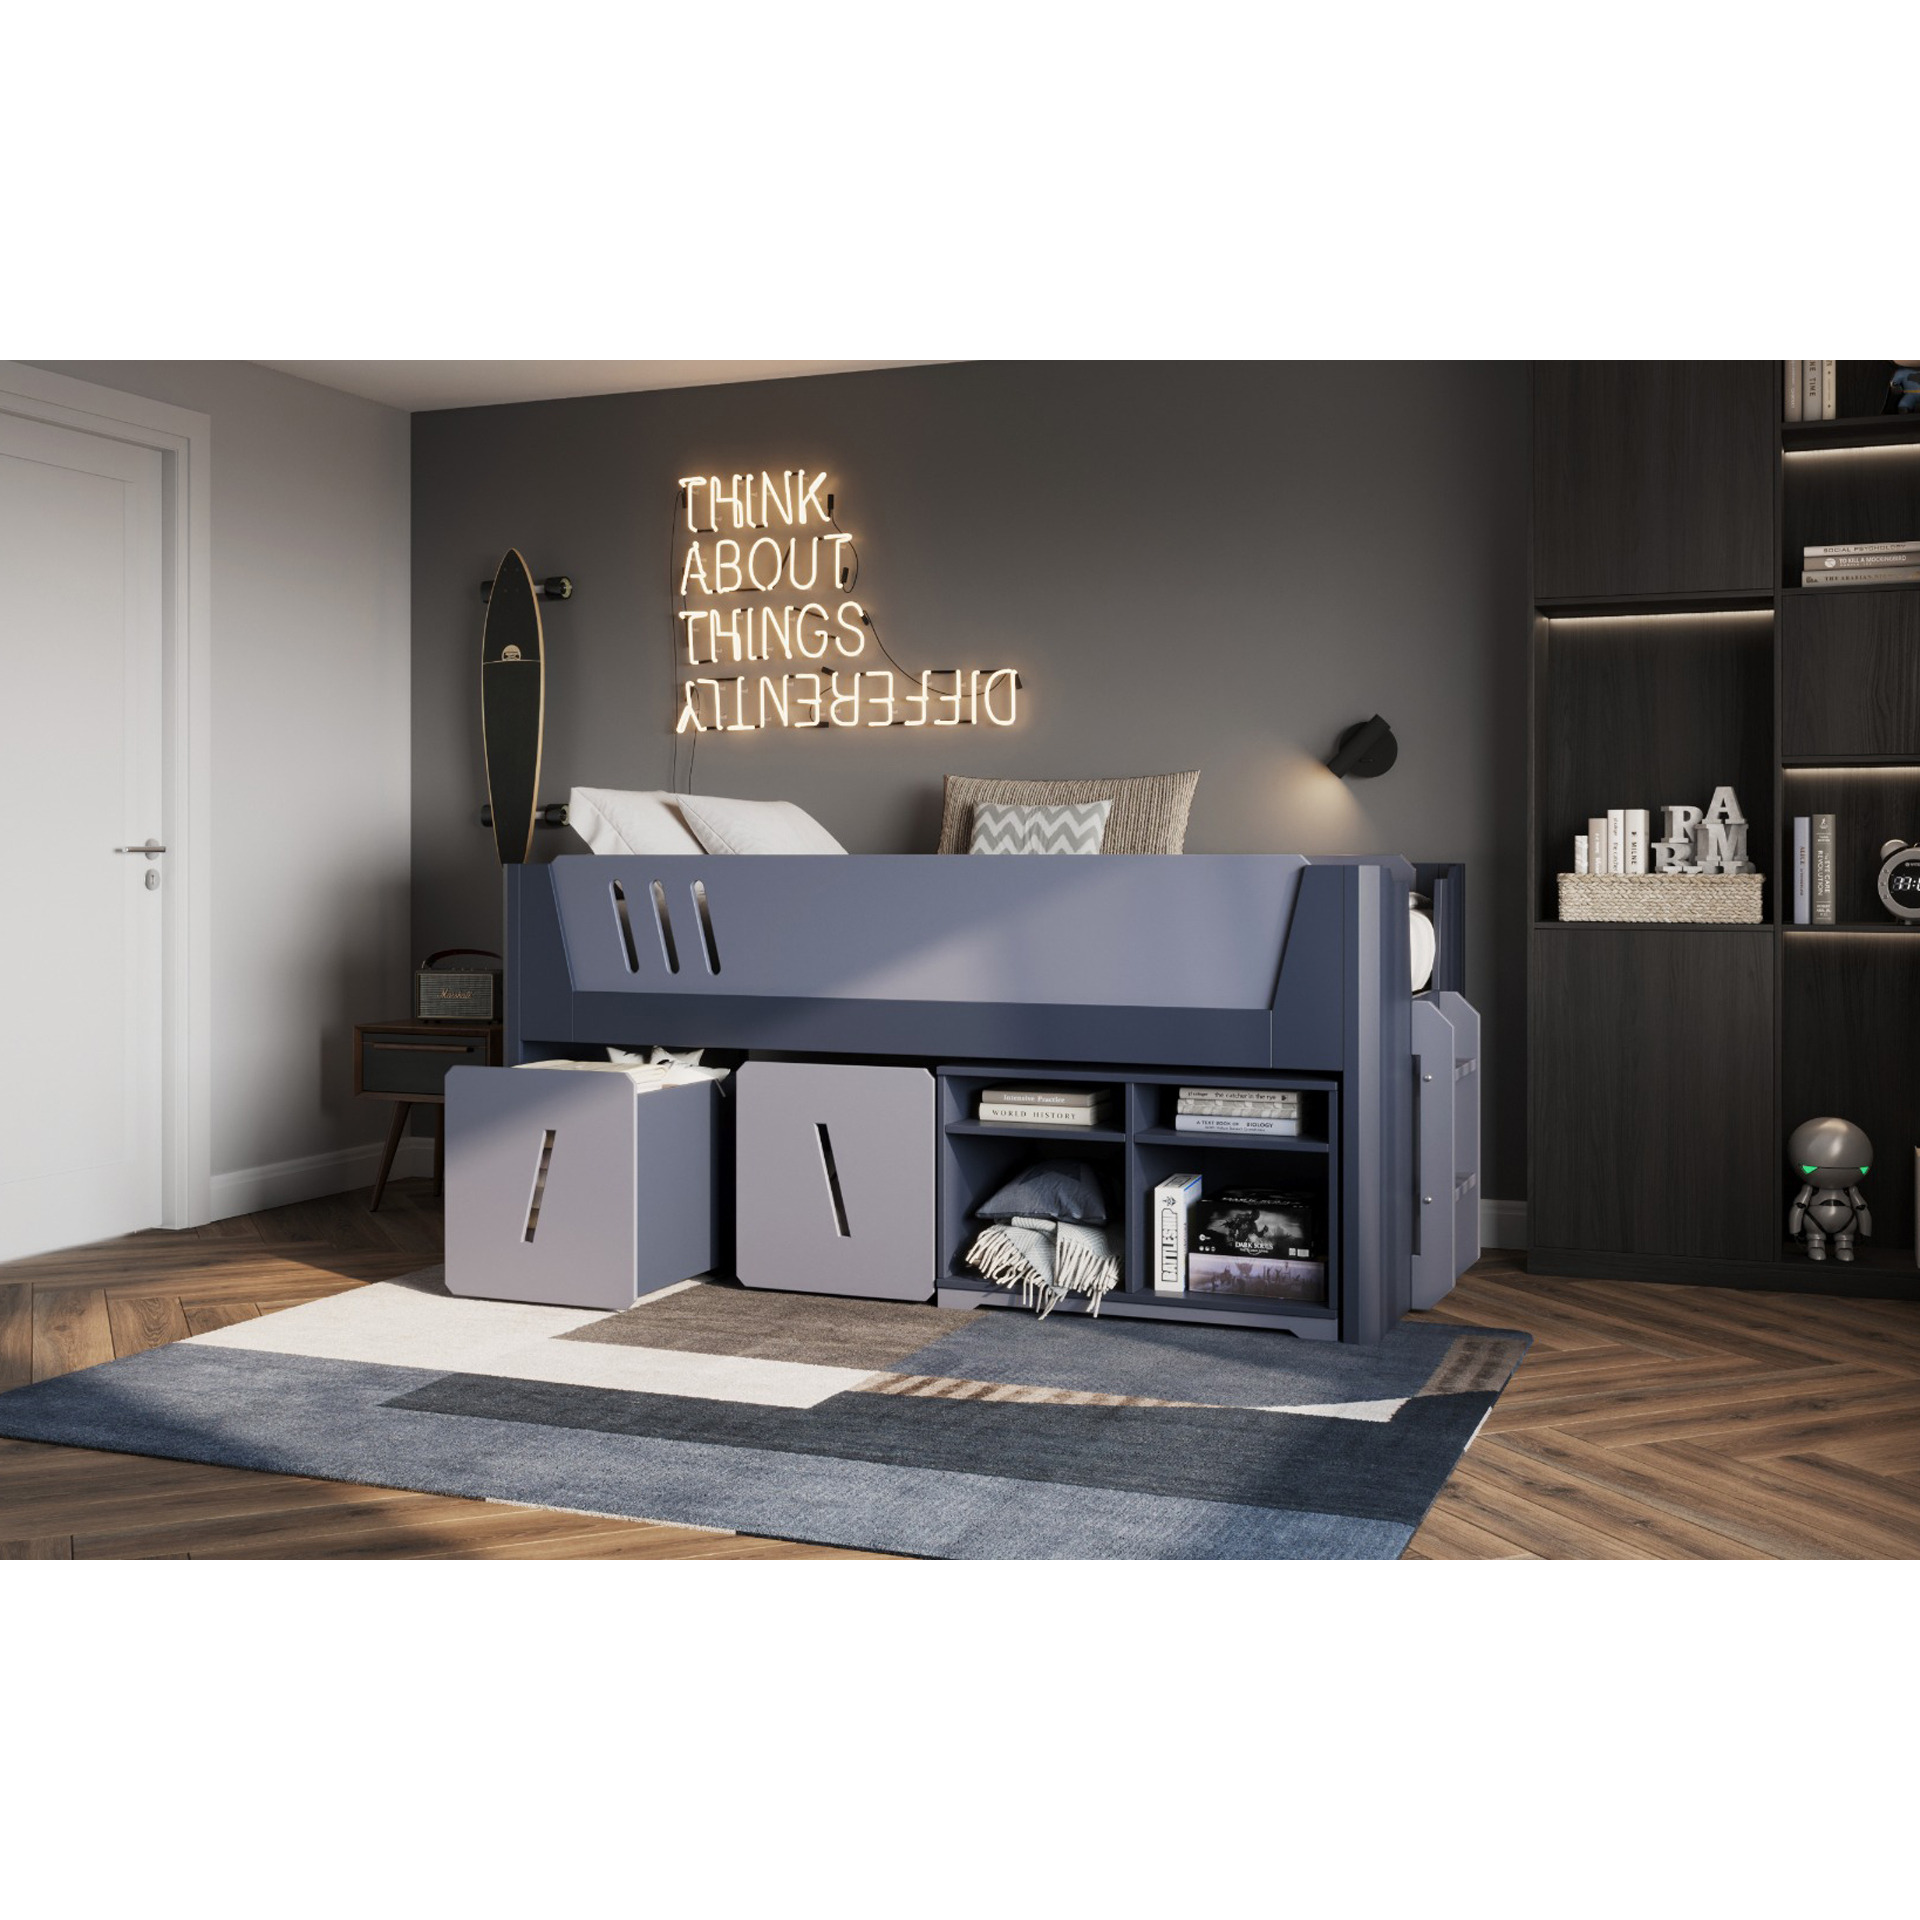 Flair Tokyo Cabin Bed Mid Sleeper in Grey and Navy - image 1